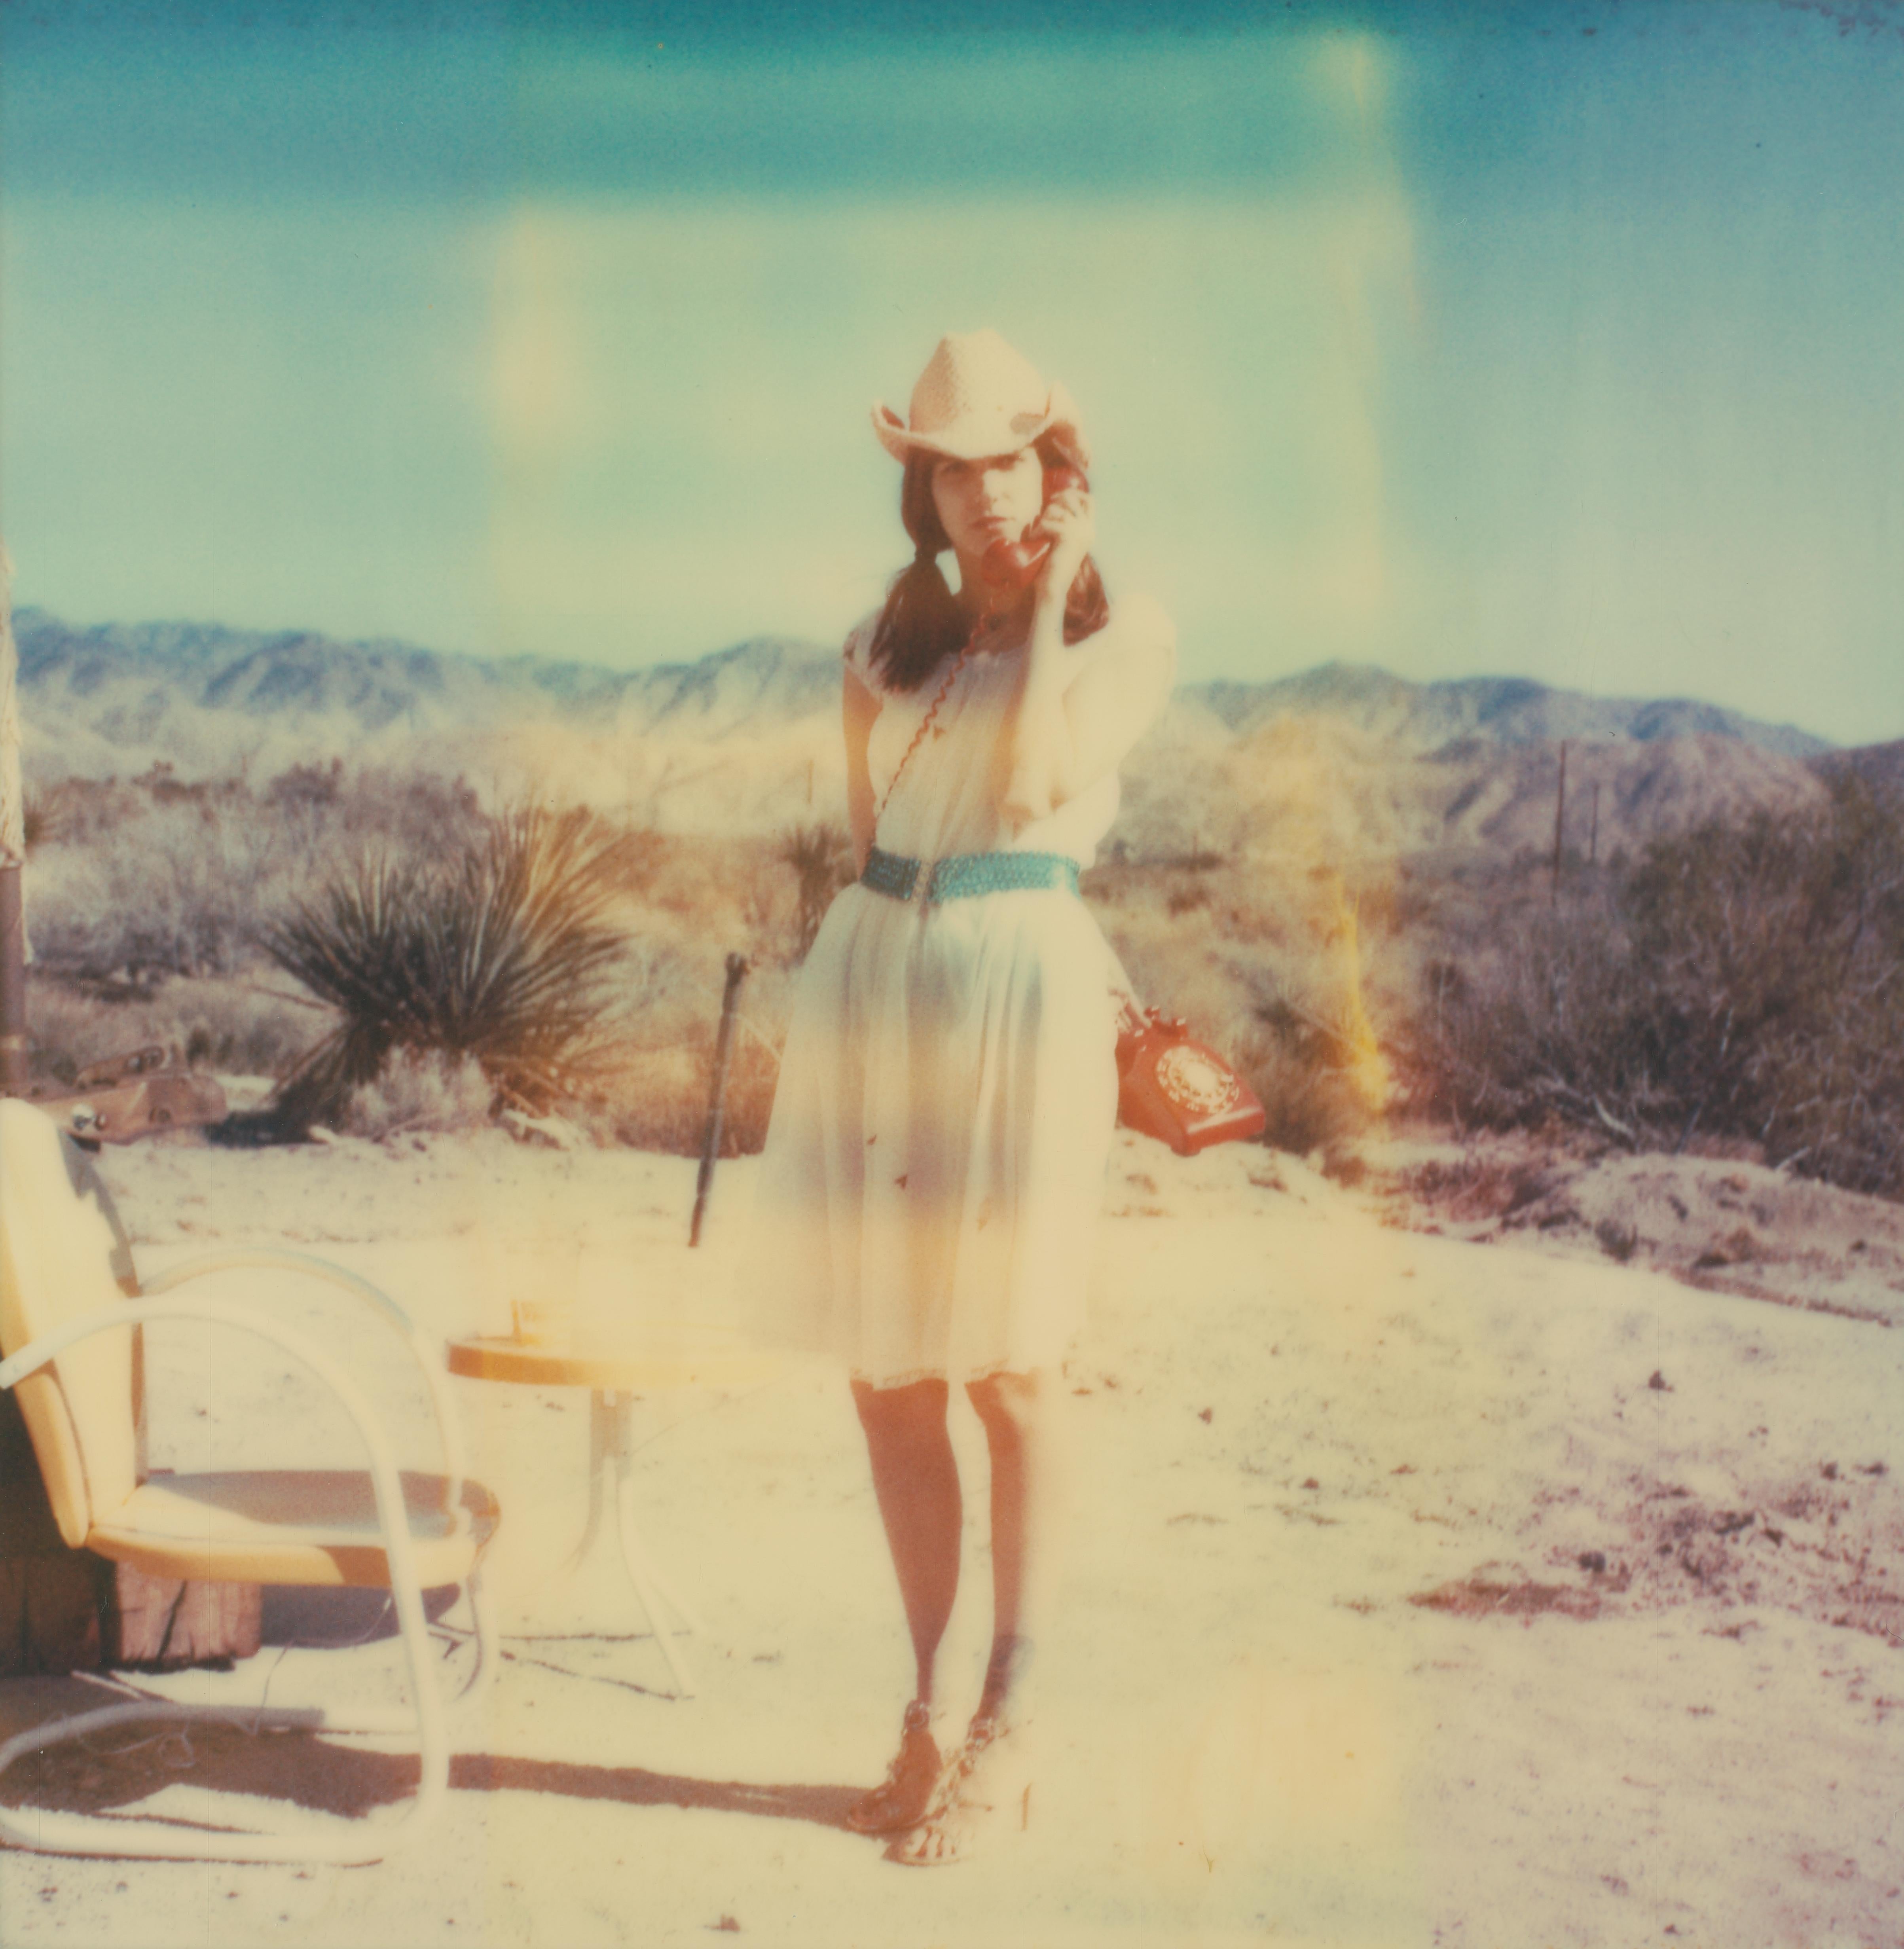 Stefanie Schneider Portrait Painting - Memories of Love III (The Girl behind the White Picket Fence) - Polaroid, Color